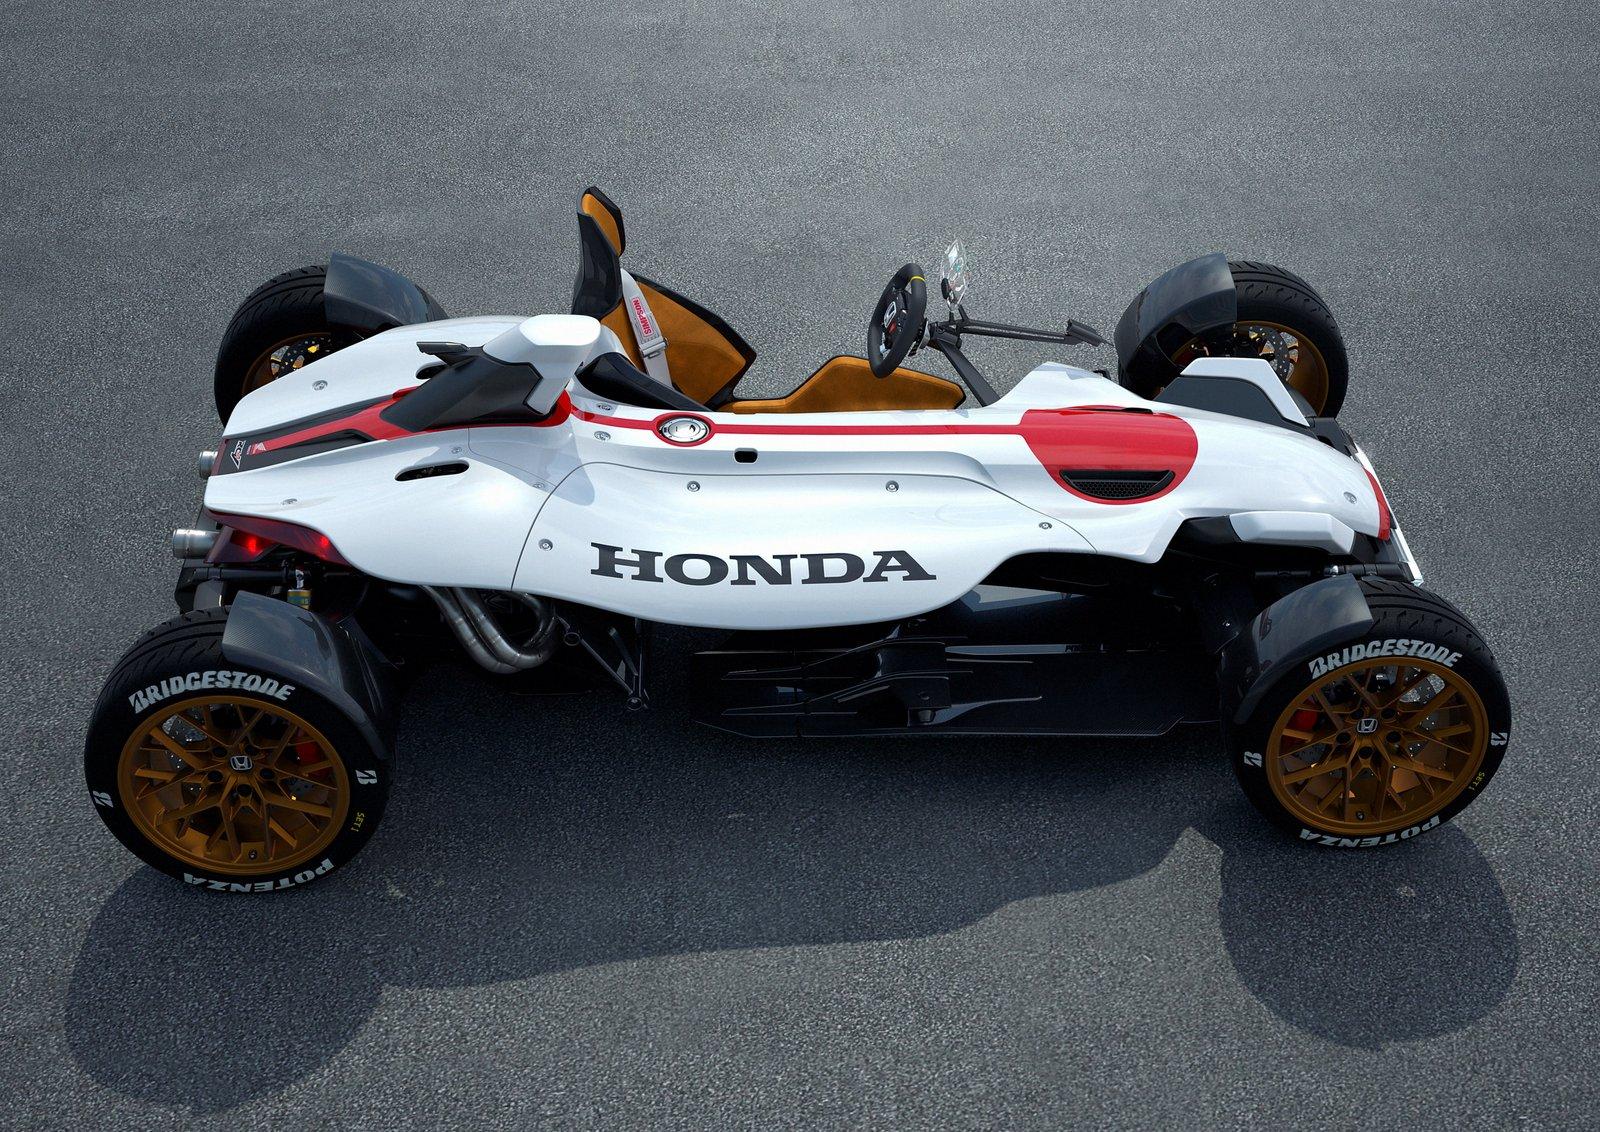 Honda Project 2&4 Is a Motorcycle under Car Clothing, Comes to